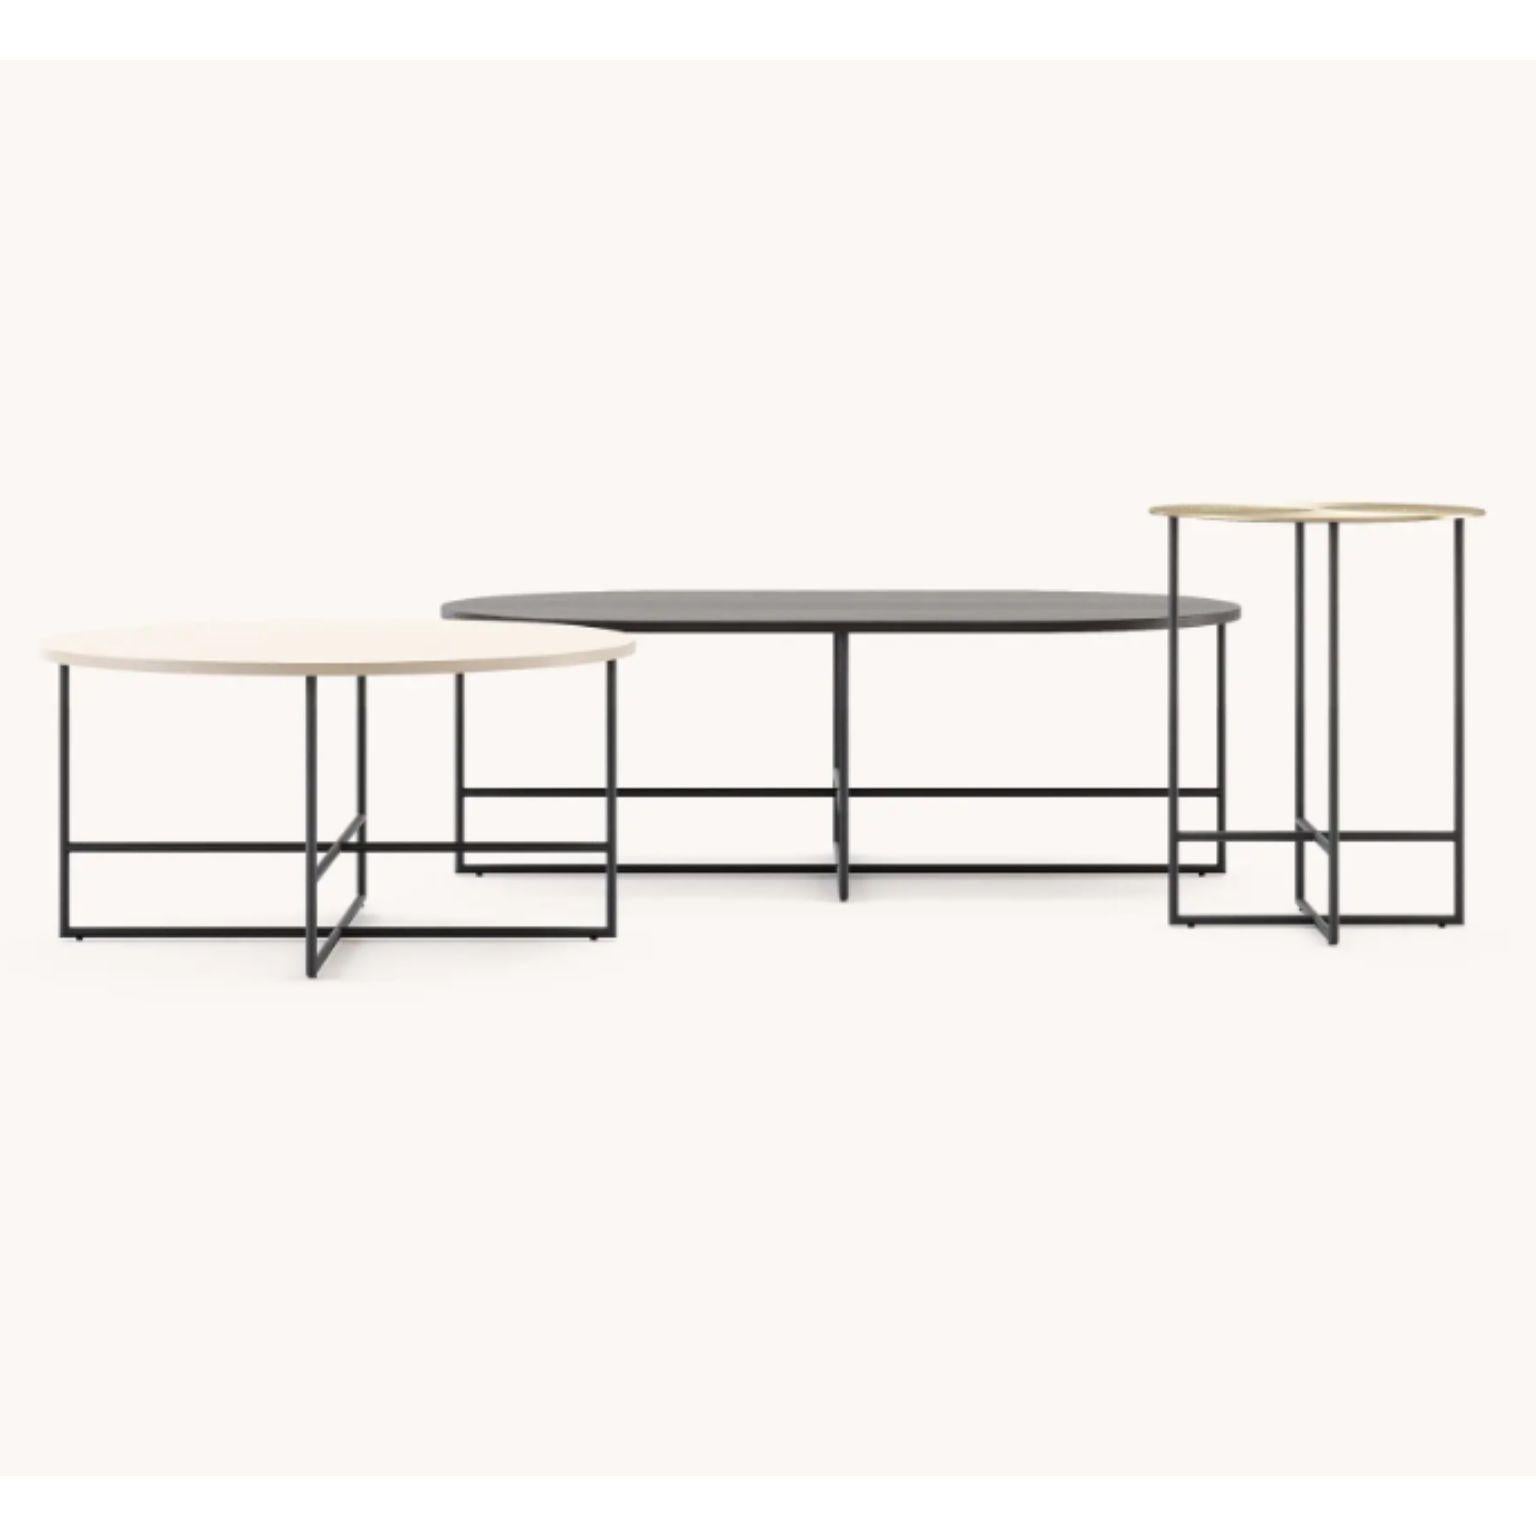 Contemporary Inside Center Table by Domkapa For Sale